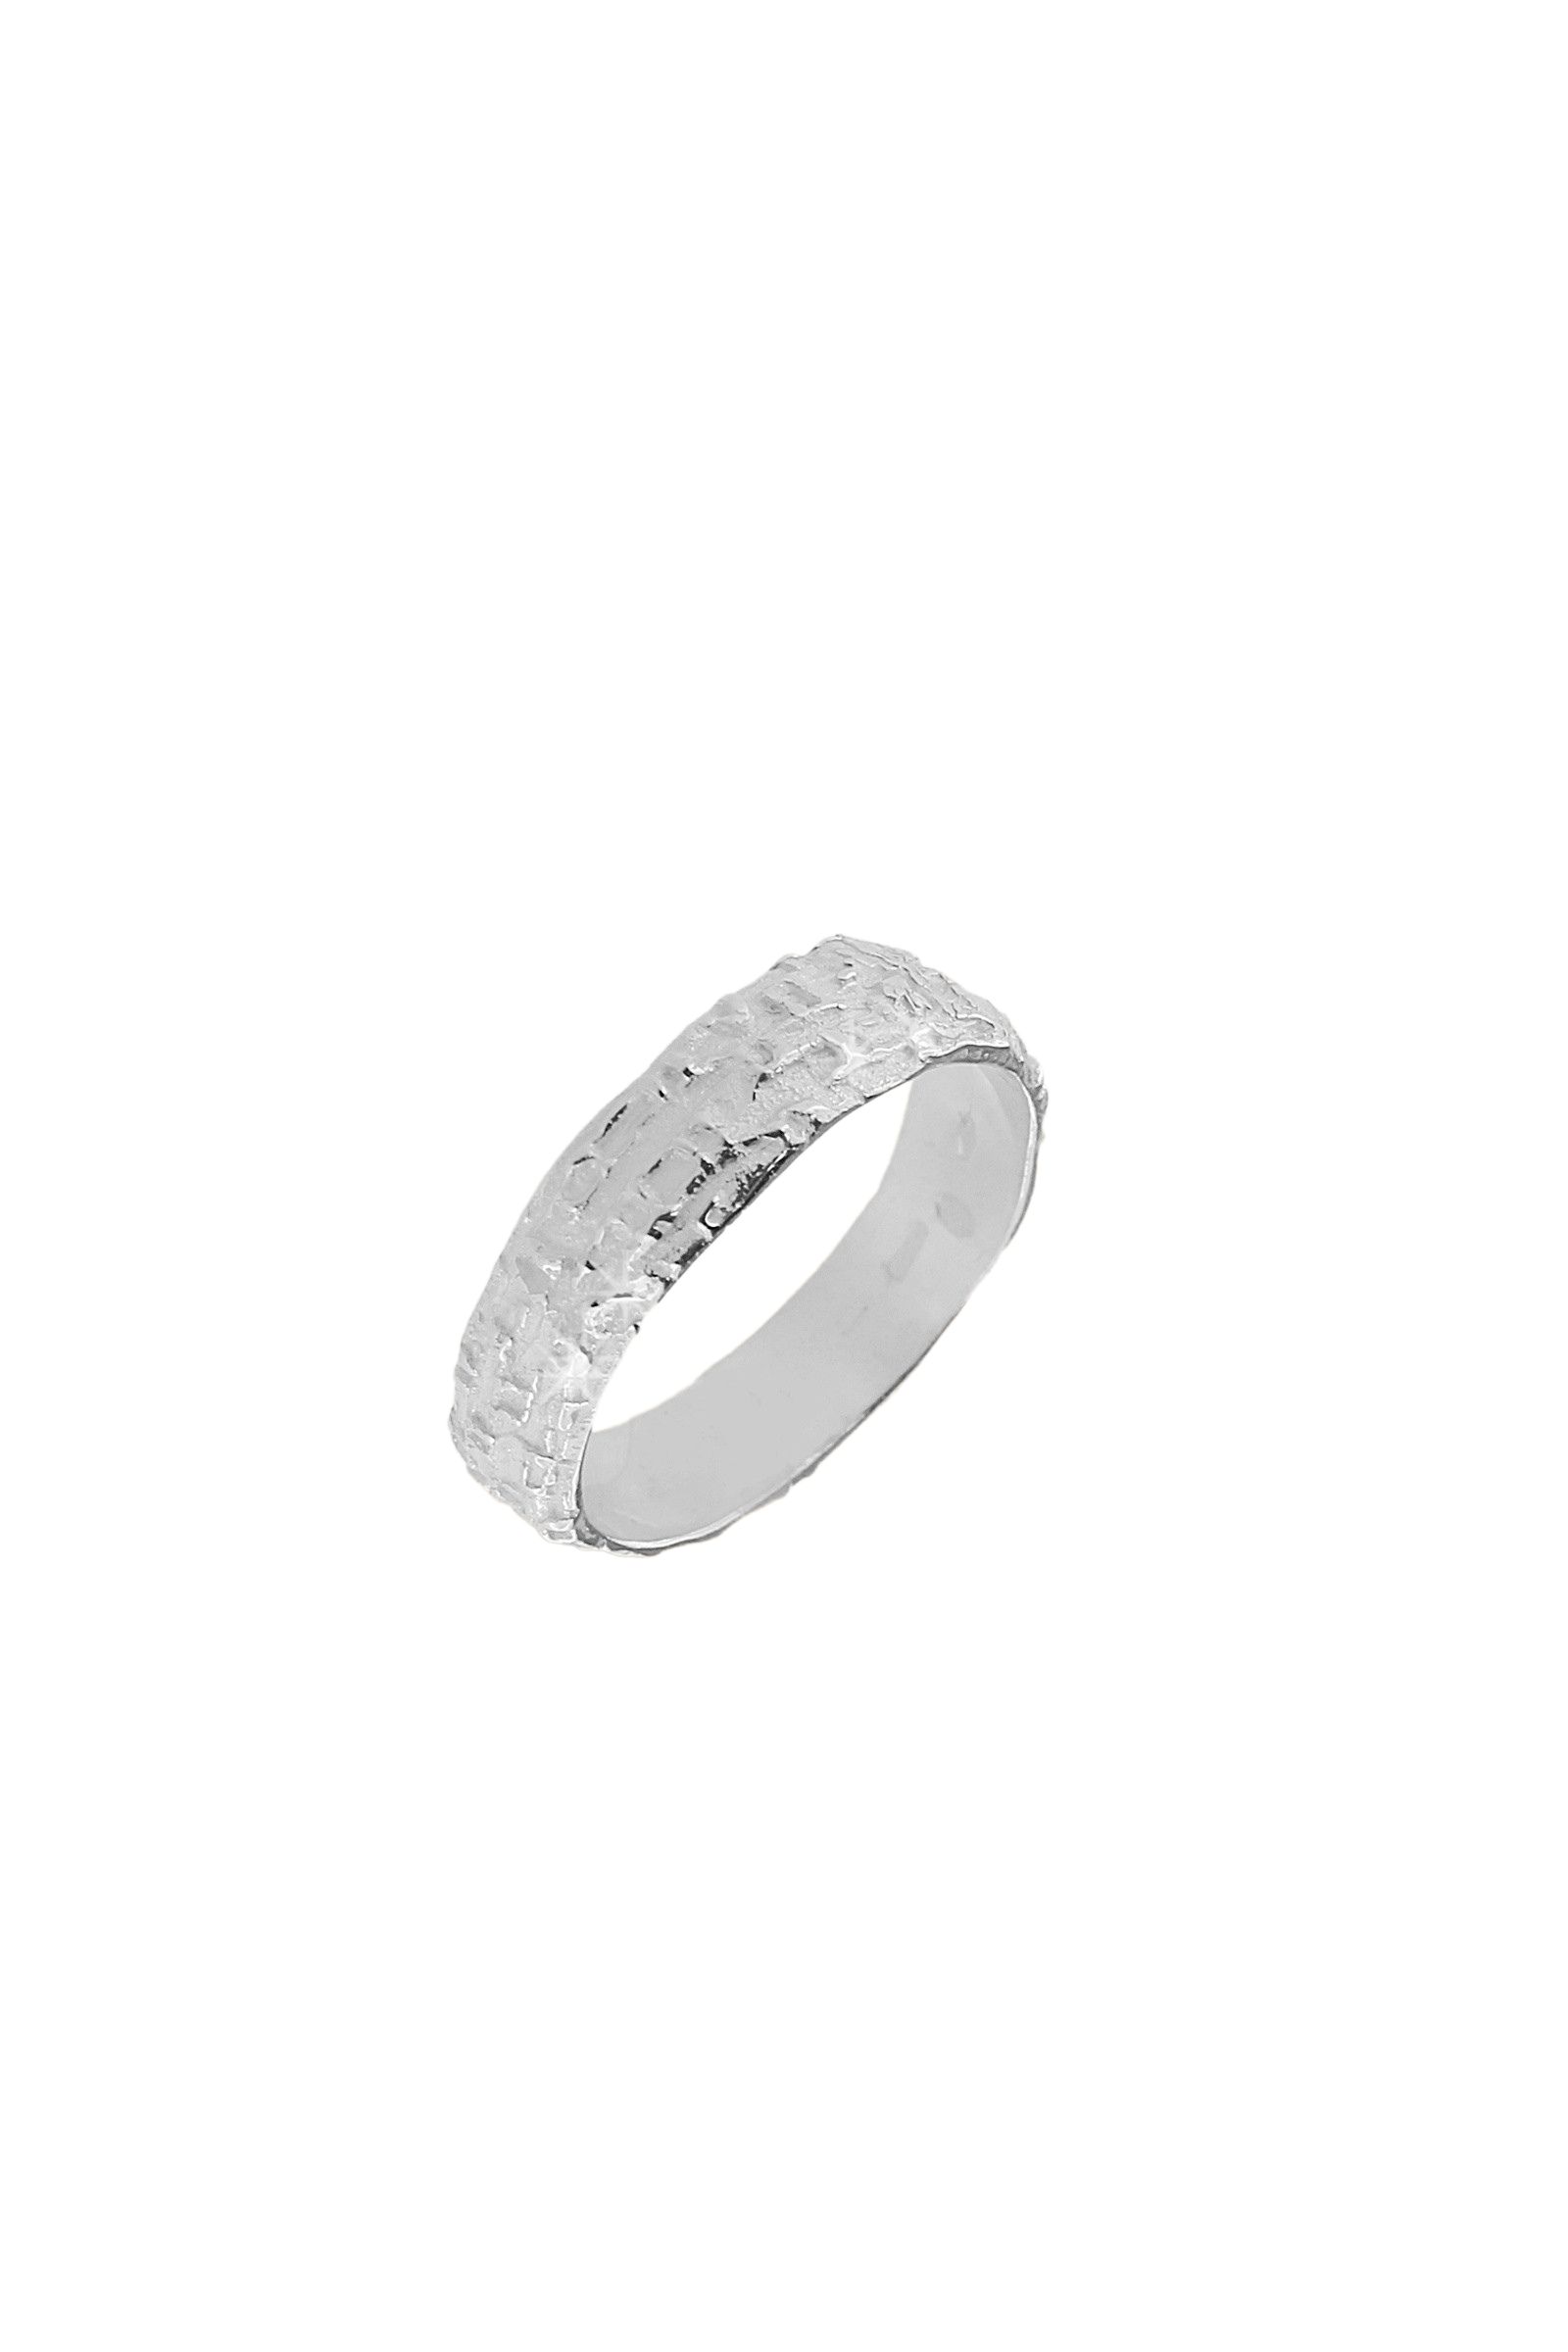 AE47-Sterling-Silver-925-Band-Ring-1_